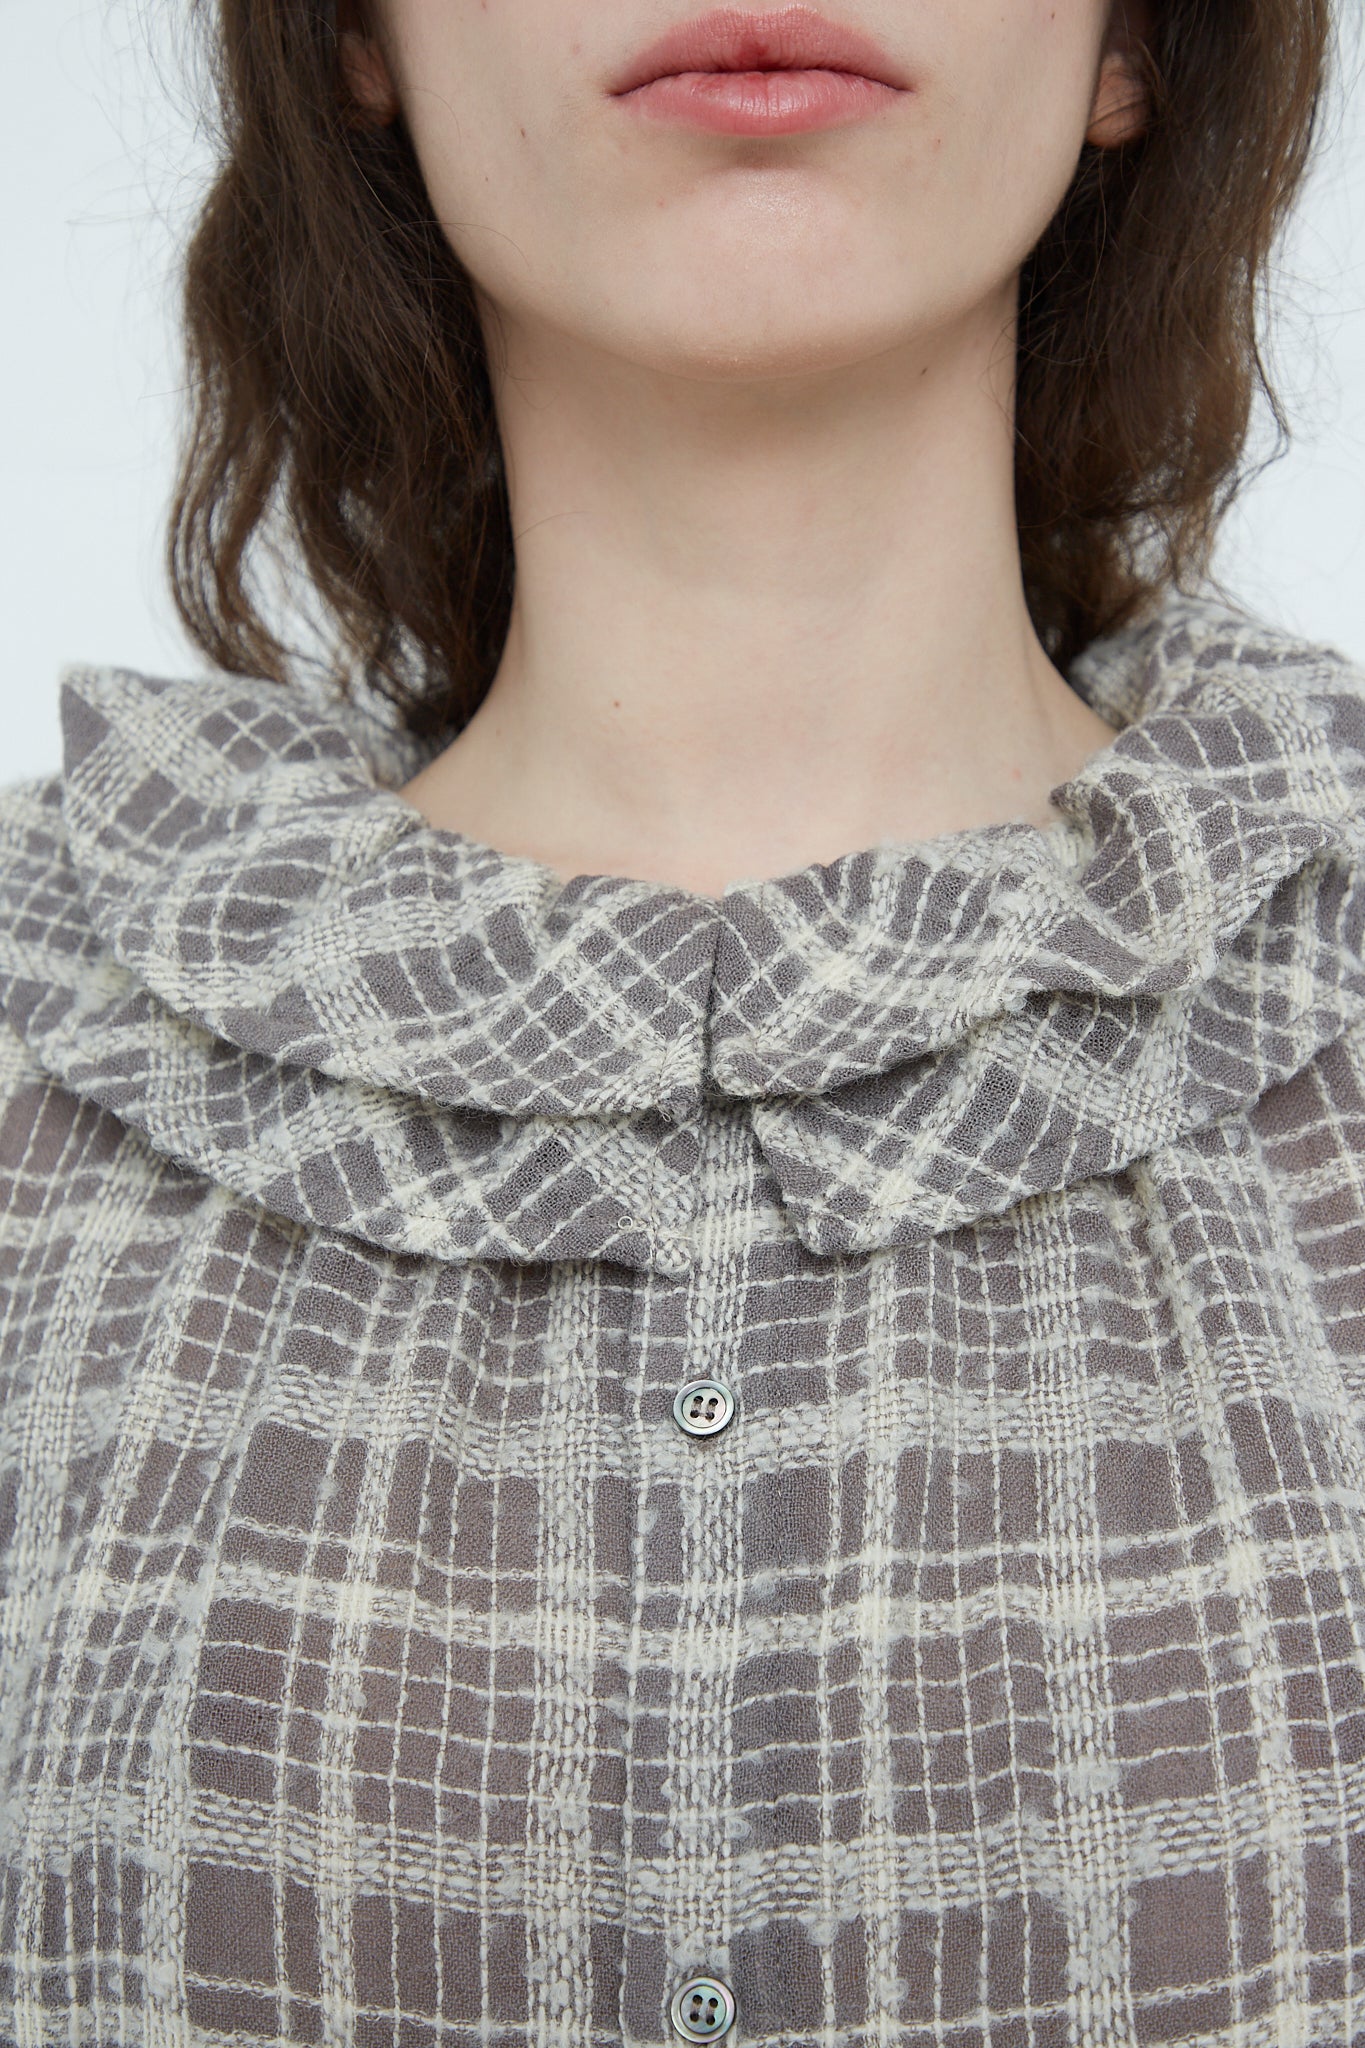 A woman wearing a Wool Check Frill Dress in Mocha by Ichi Antiquités. Up close view.